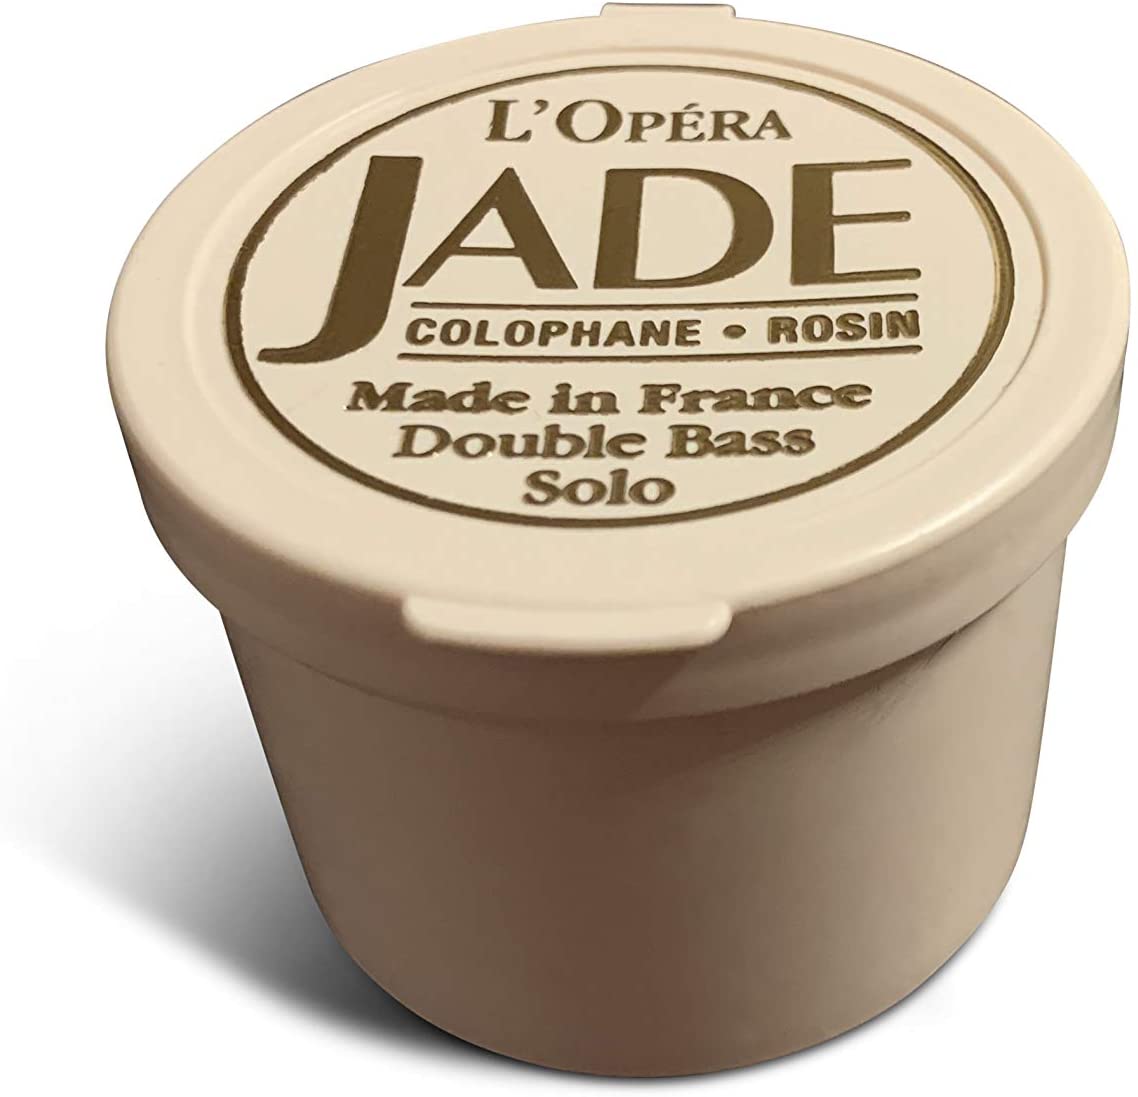 Jade L'Opéra Rosin for Double Bass